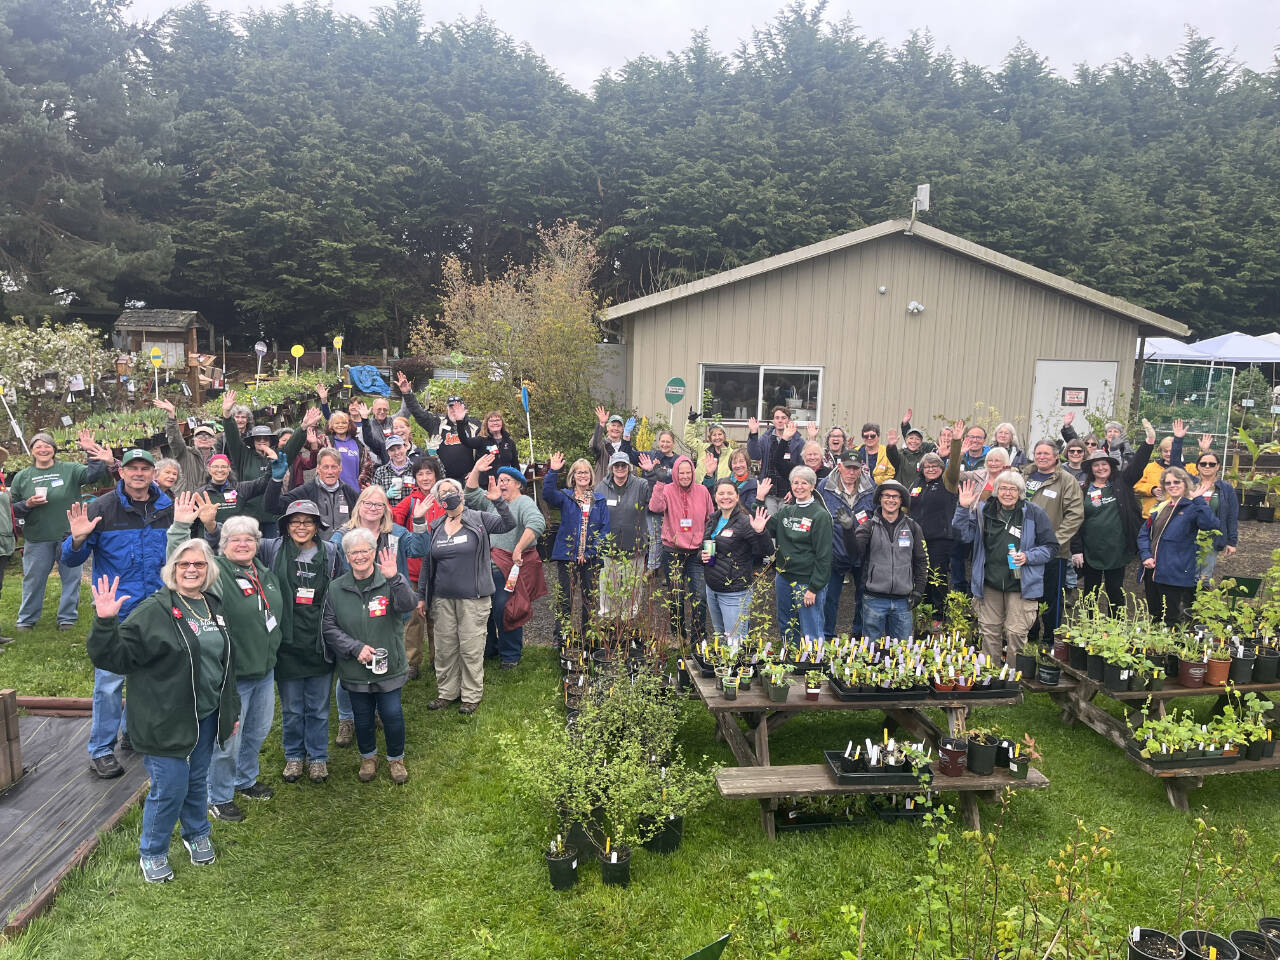 Photo by Keith Dekker
The crew at the the Master Gardener Foundation of Clallam County Spring Plant Sale is ready for another big event. This year’s sale is set for 9 a.m.-12:30 p.m. and 1-3 p.m. on Saturday, May 4, at the Woodcock Demonstration Garden, 2711 Woodcock Road. Choose from vegetable and herb starts, native saplings and shrubs, perennials, succulents, ornamental grasses, ground covers, houseplants, gardening gifts, gently-used garden supplies and more. Proceeds help fund education programs and demonstration gardens.